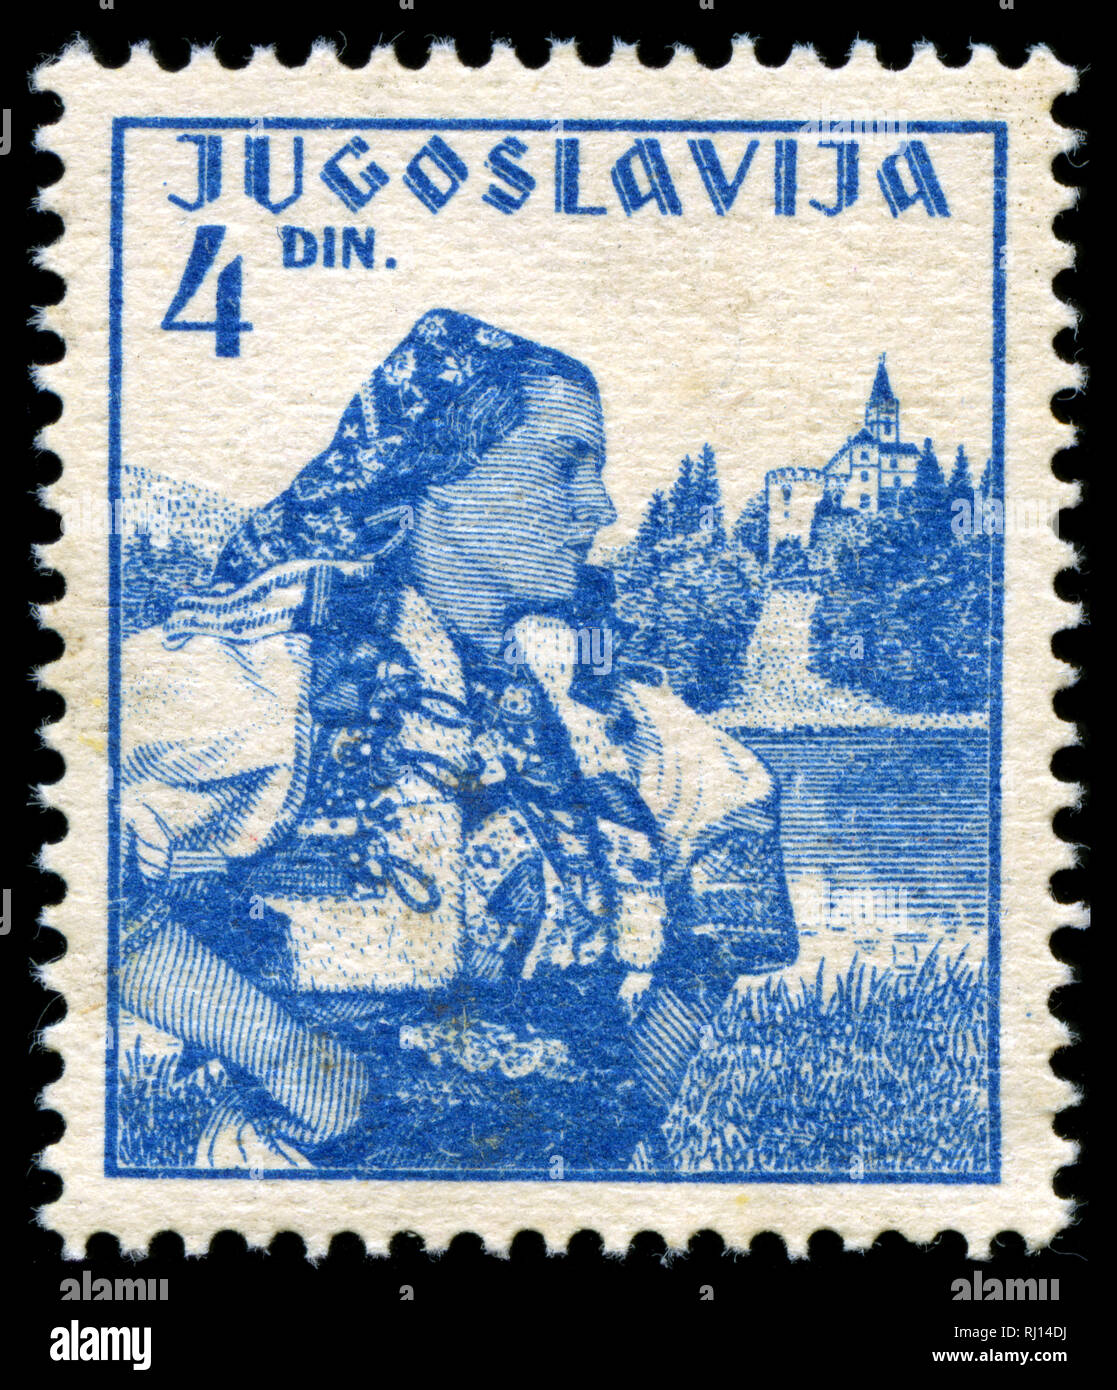 Postage stamp from the former state of Yugoslavia in the Philatelic Exhibition series issued in 1937 Stock Photo